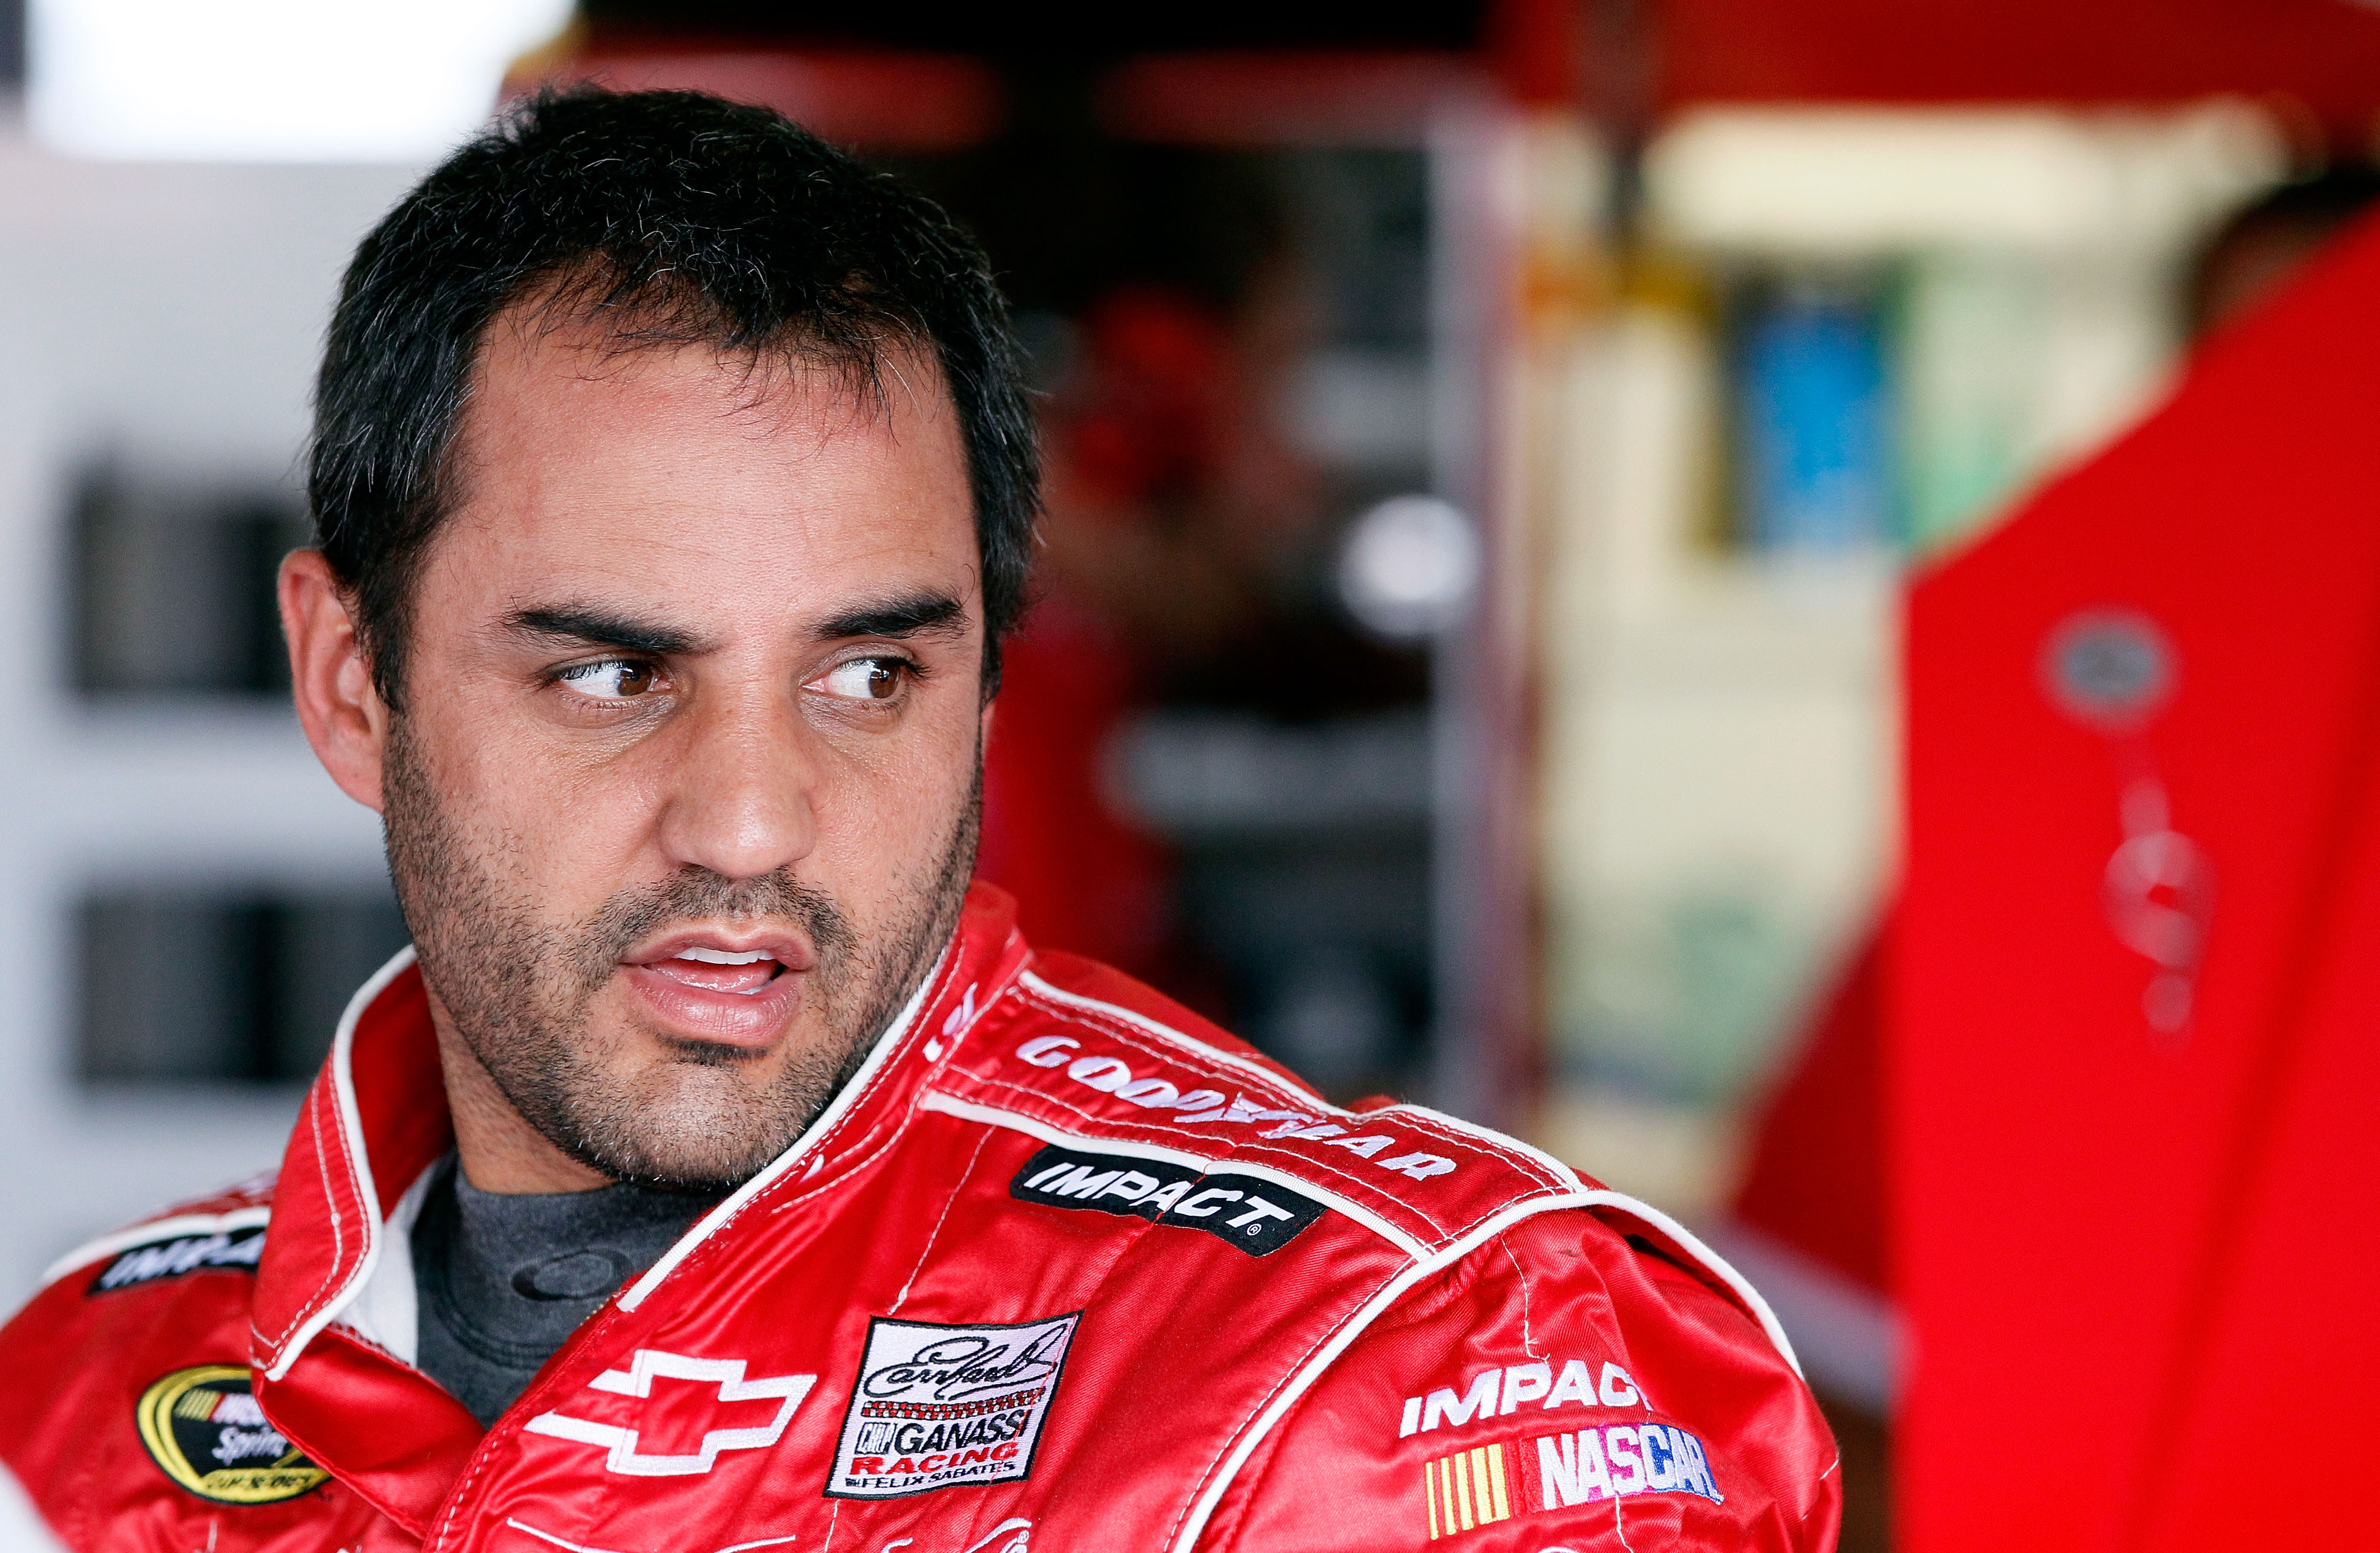 TALLADEGA, AL - APRIL 15:  Juan Pablo Montoya, driver of the #42 Target Chevrolet, stands in the garage during practice for the NASCAR Sprint Cup Series Aaron's 499 at Talladega Superspeedway on April 15, 2011 in Talladega, Alabama.  (Photo by Kevin C. Co